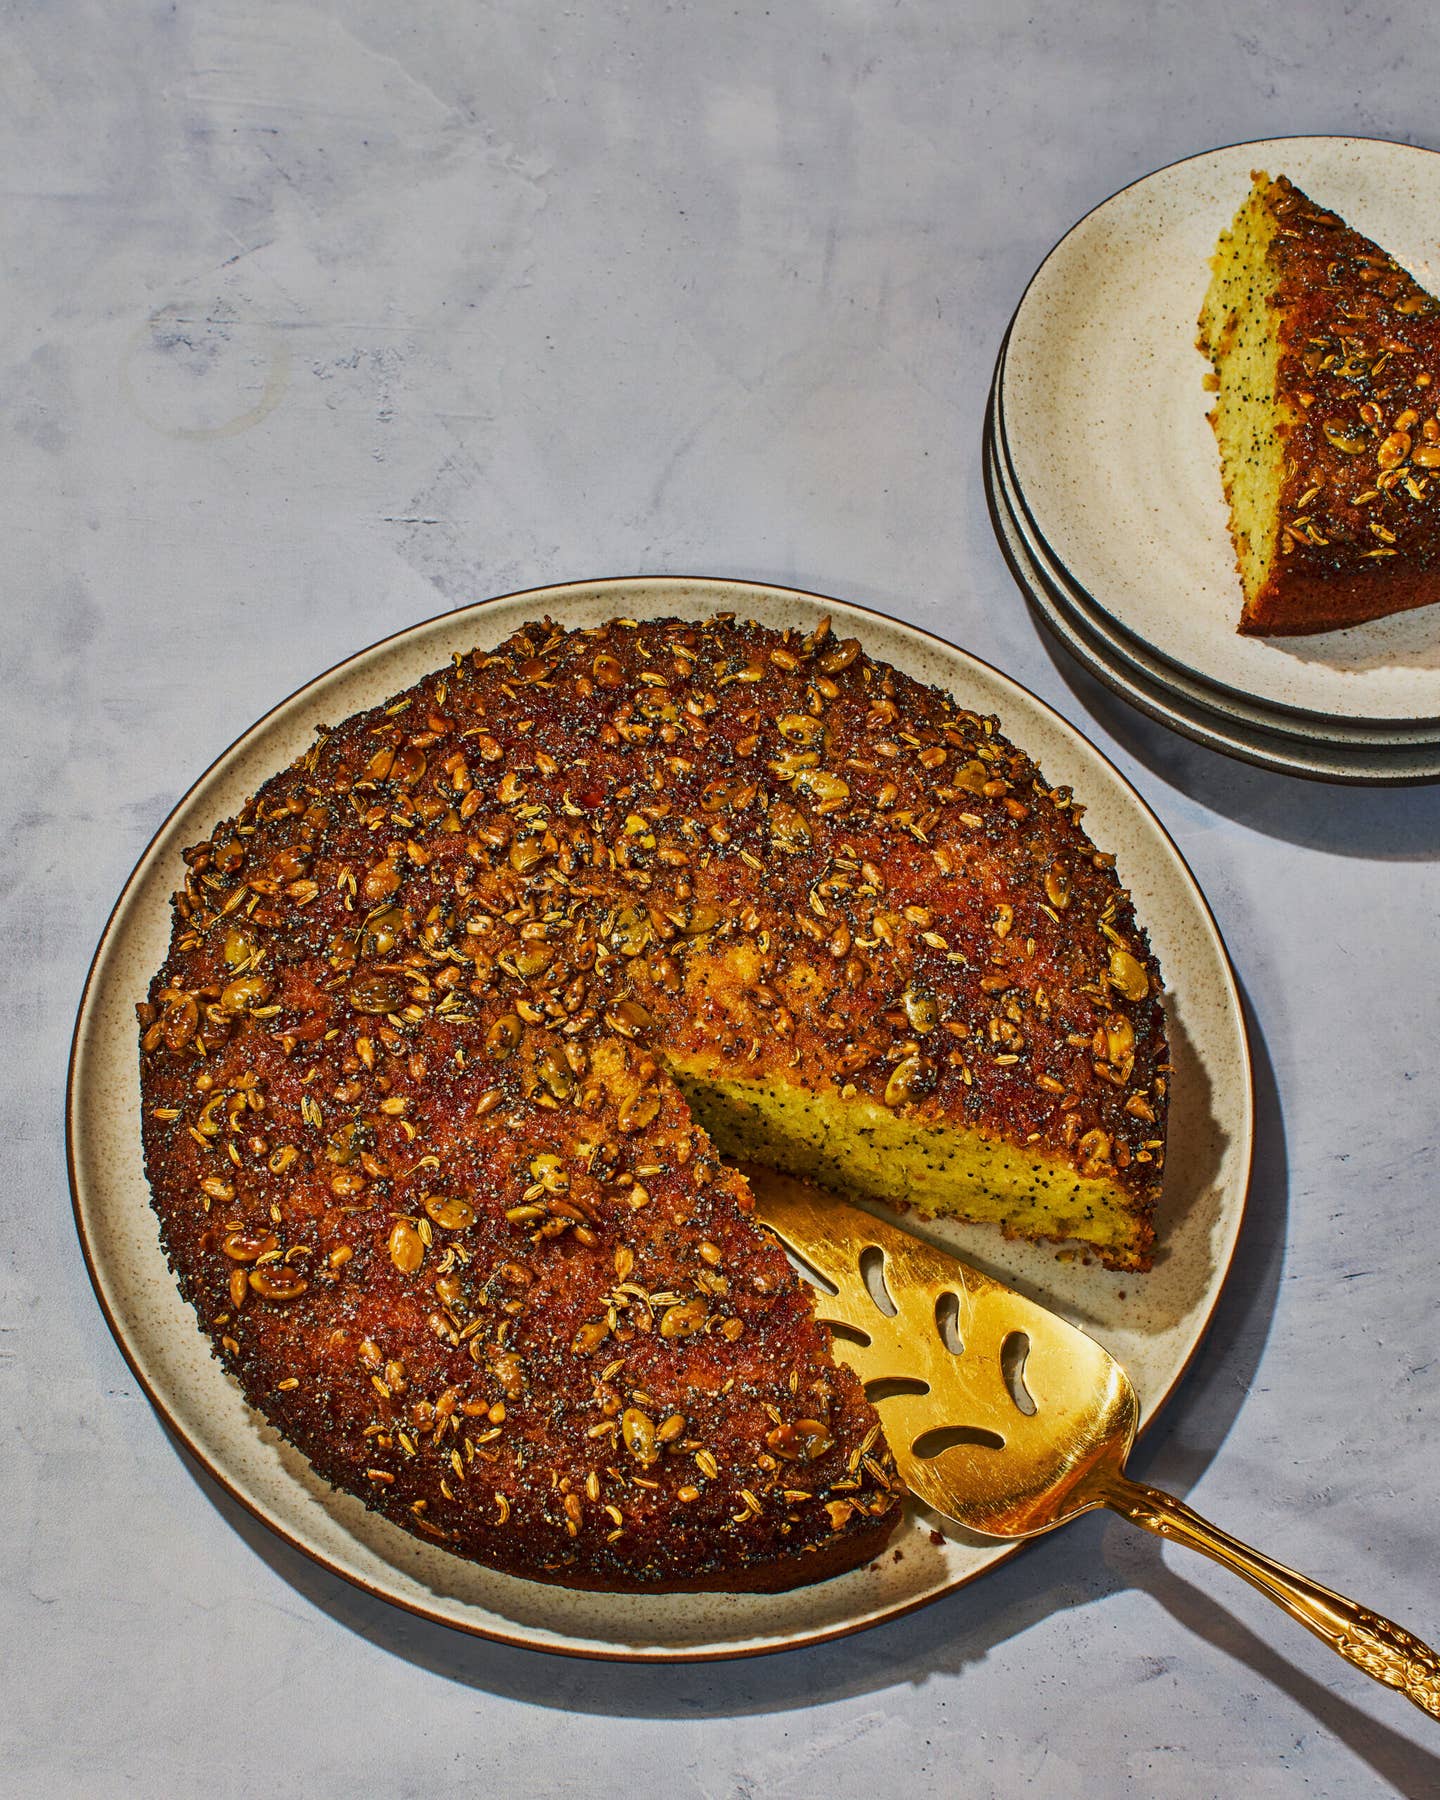 Mixed Seed Upside-Down Cake